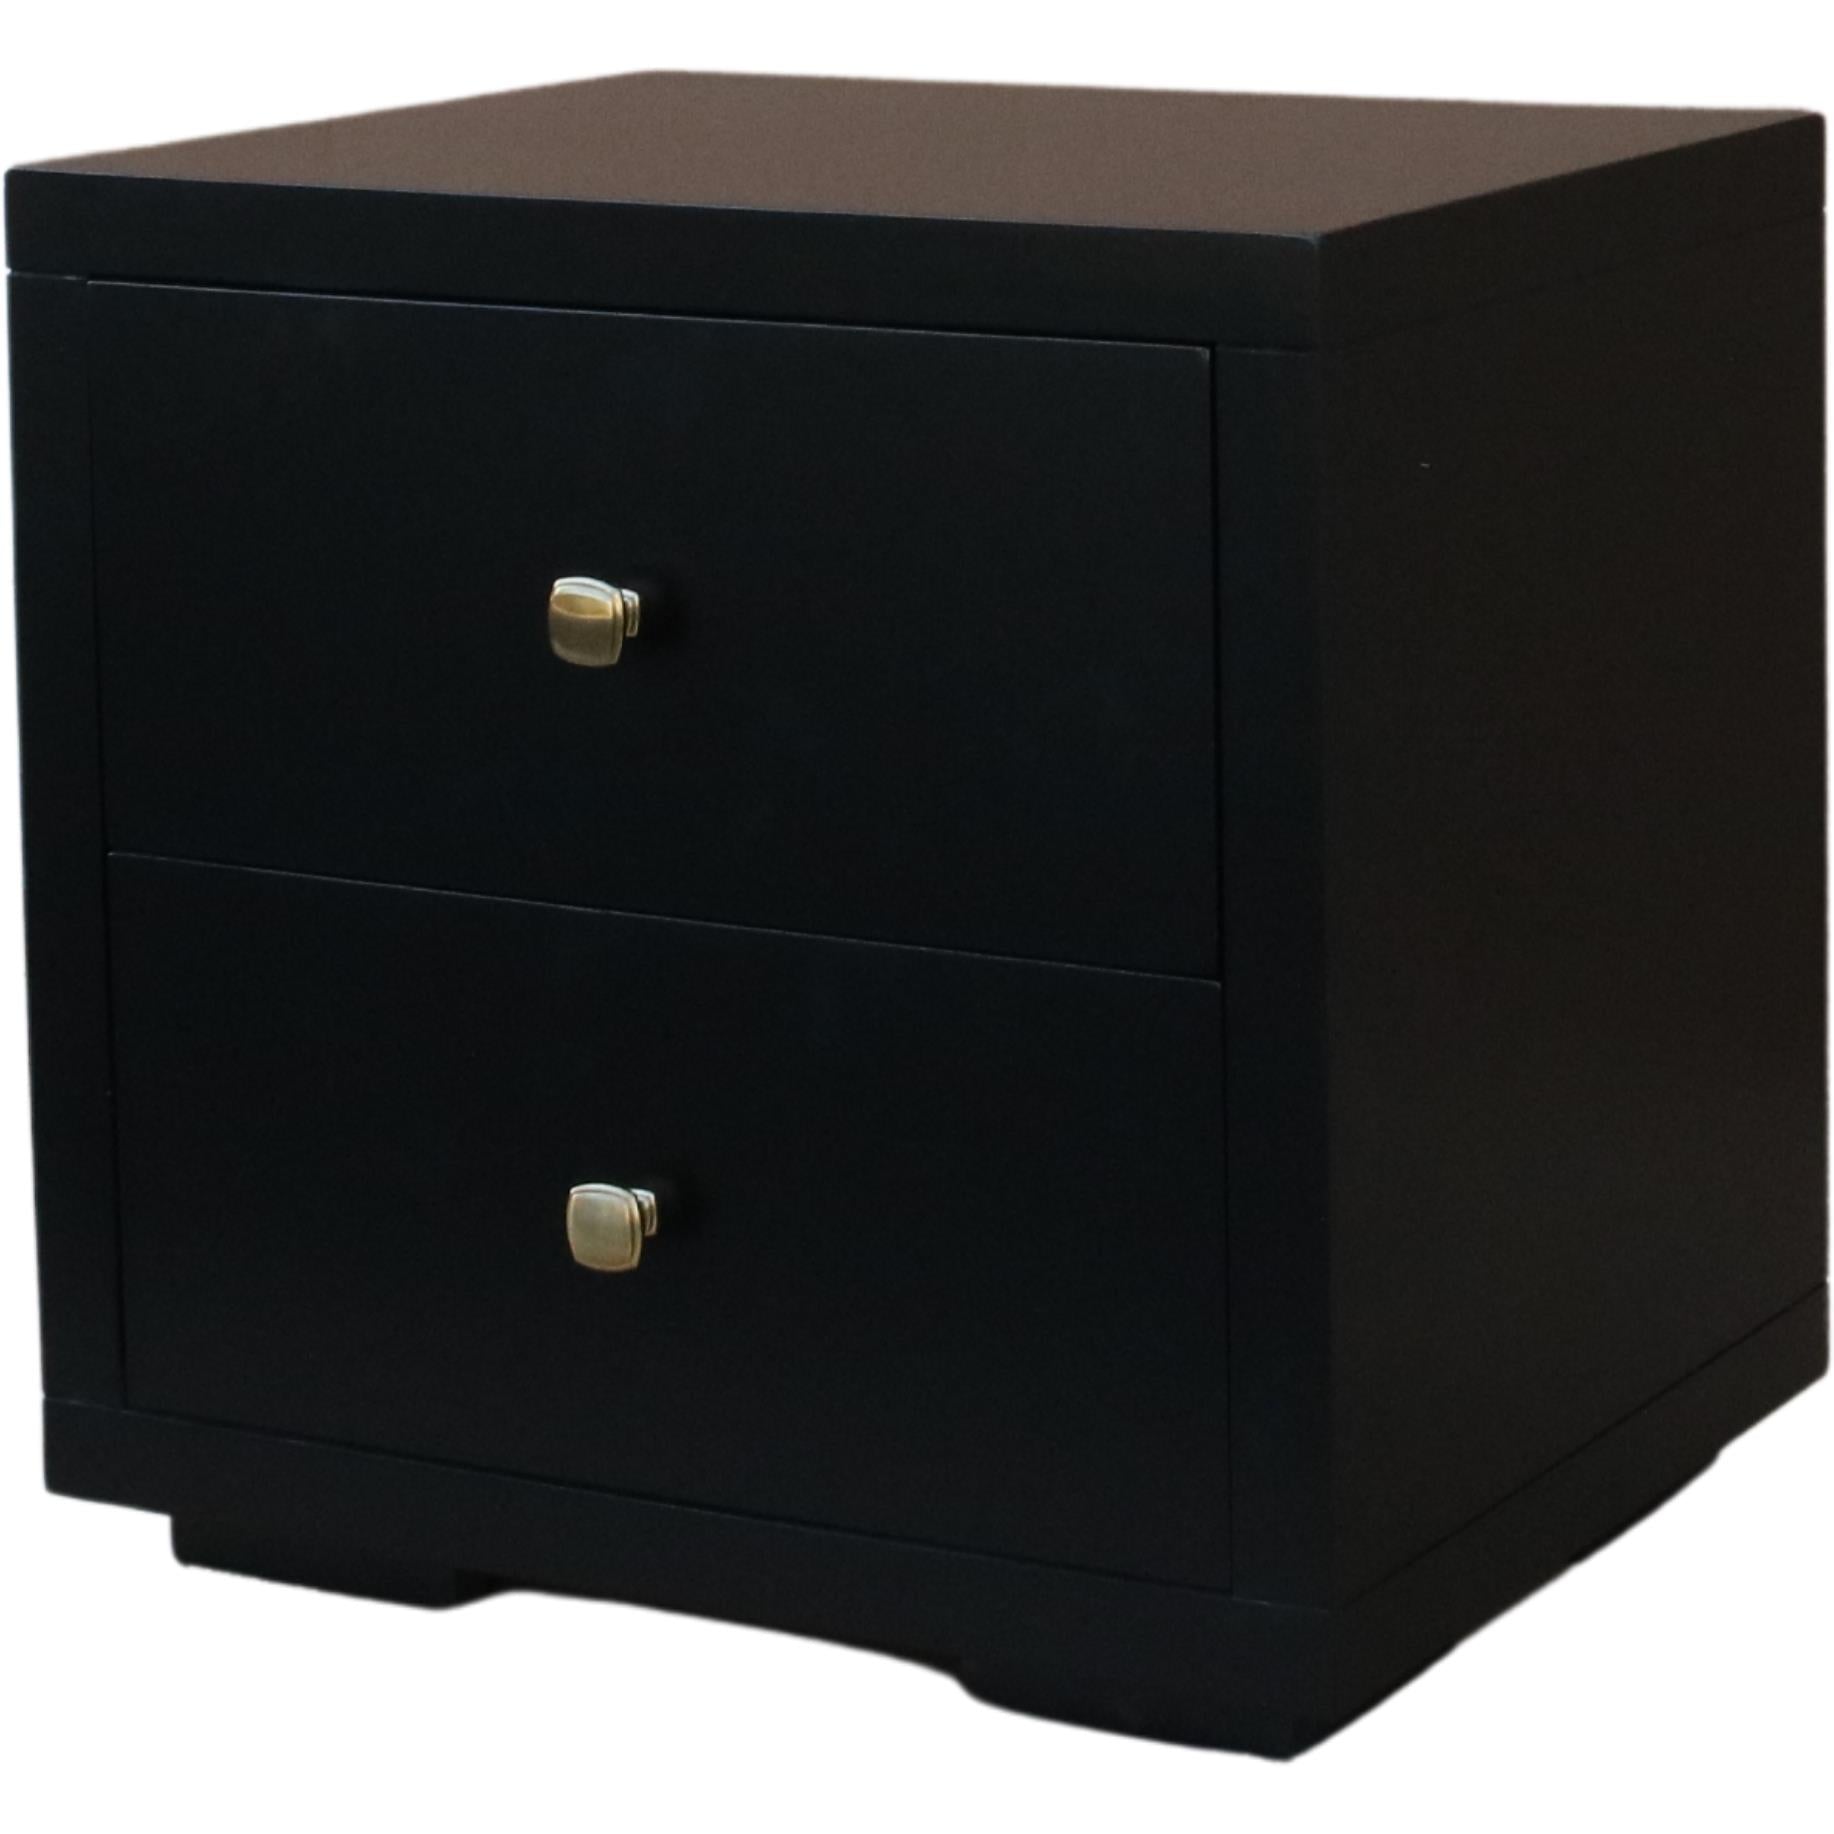 Moma Black Wood Platform Full Bed With Nightstand